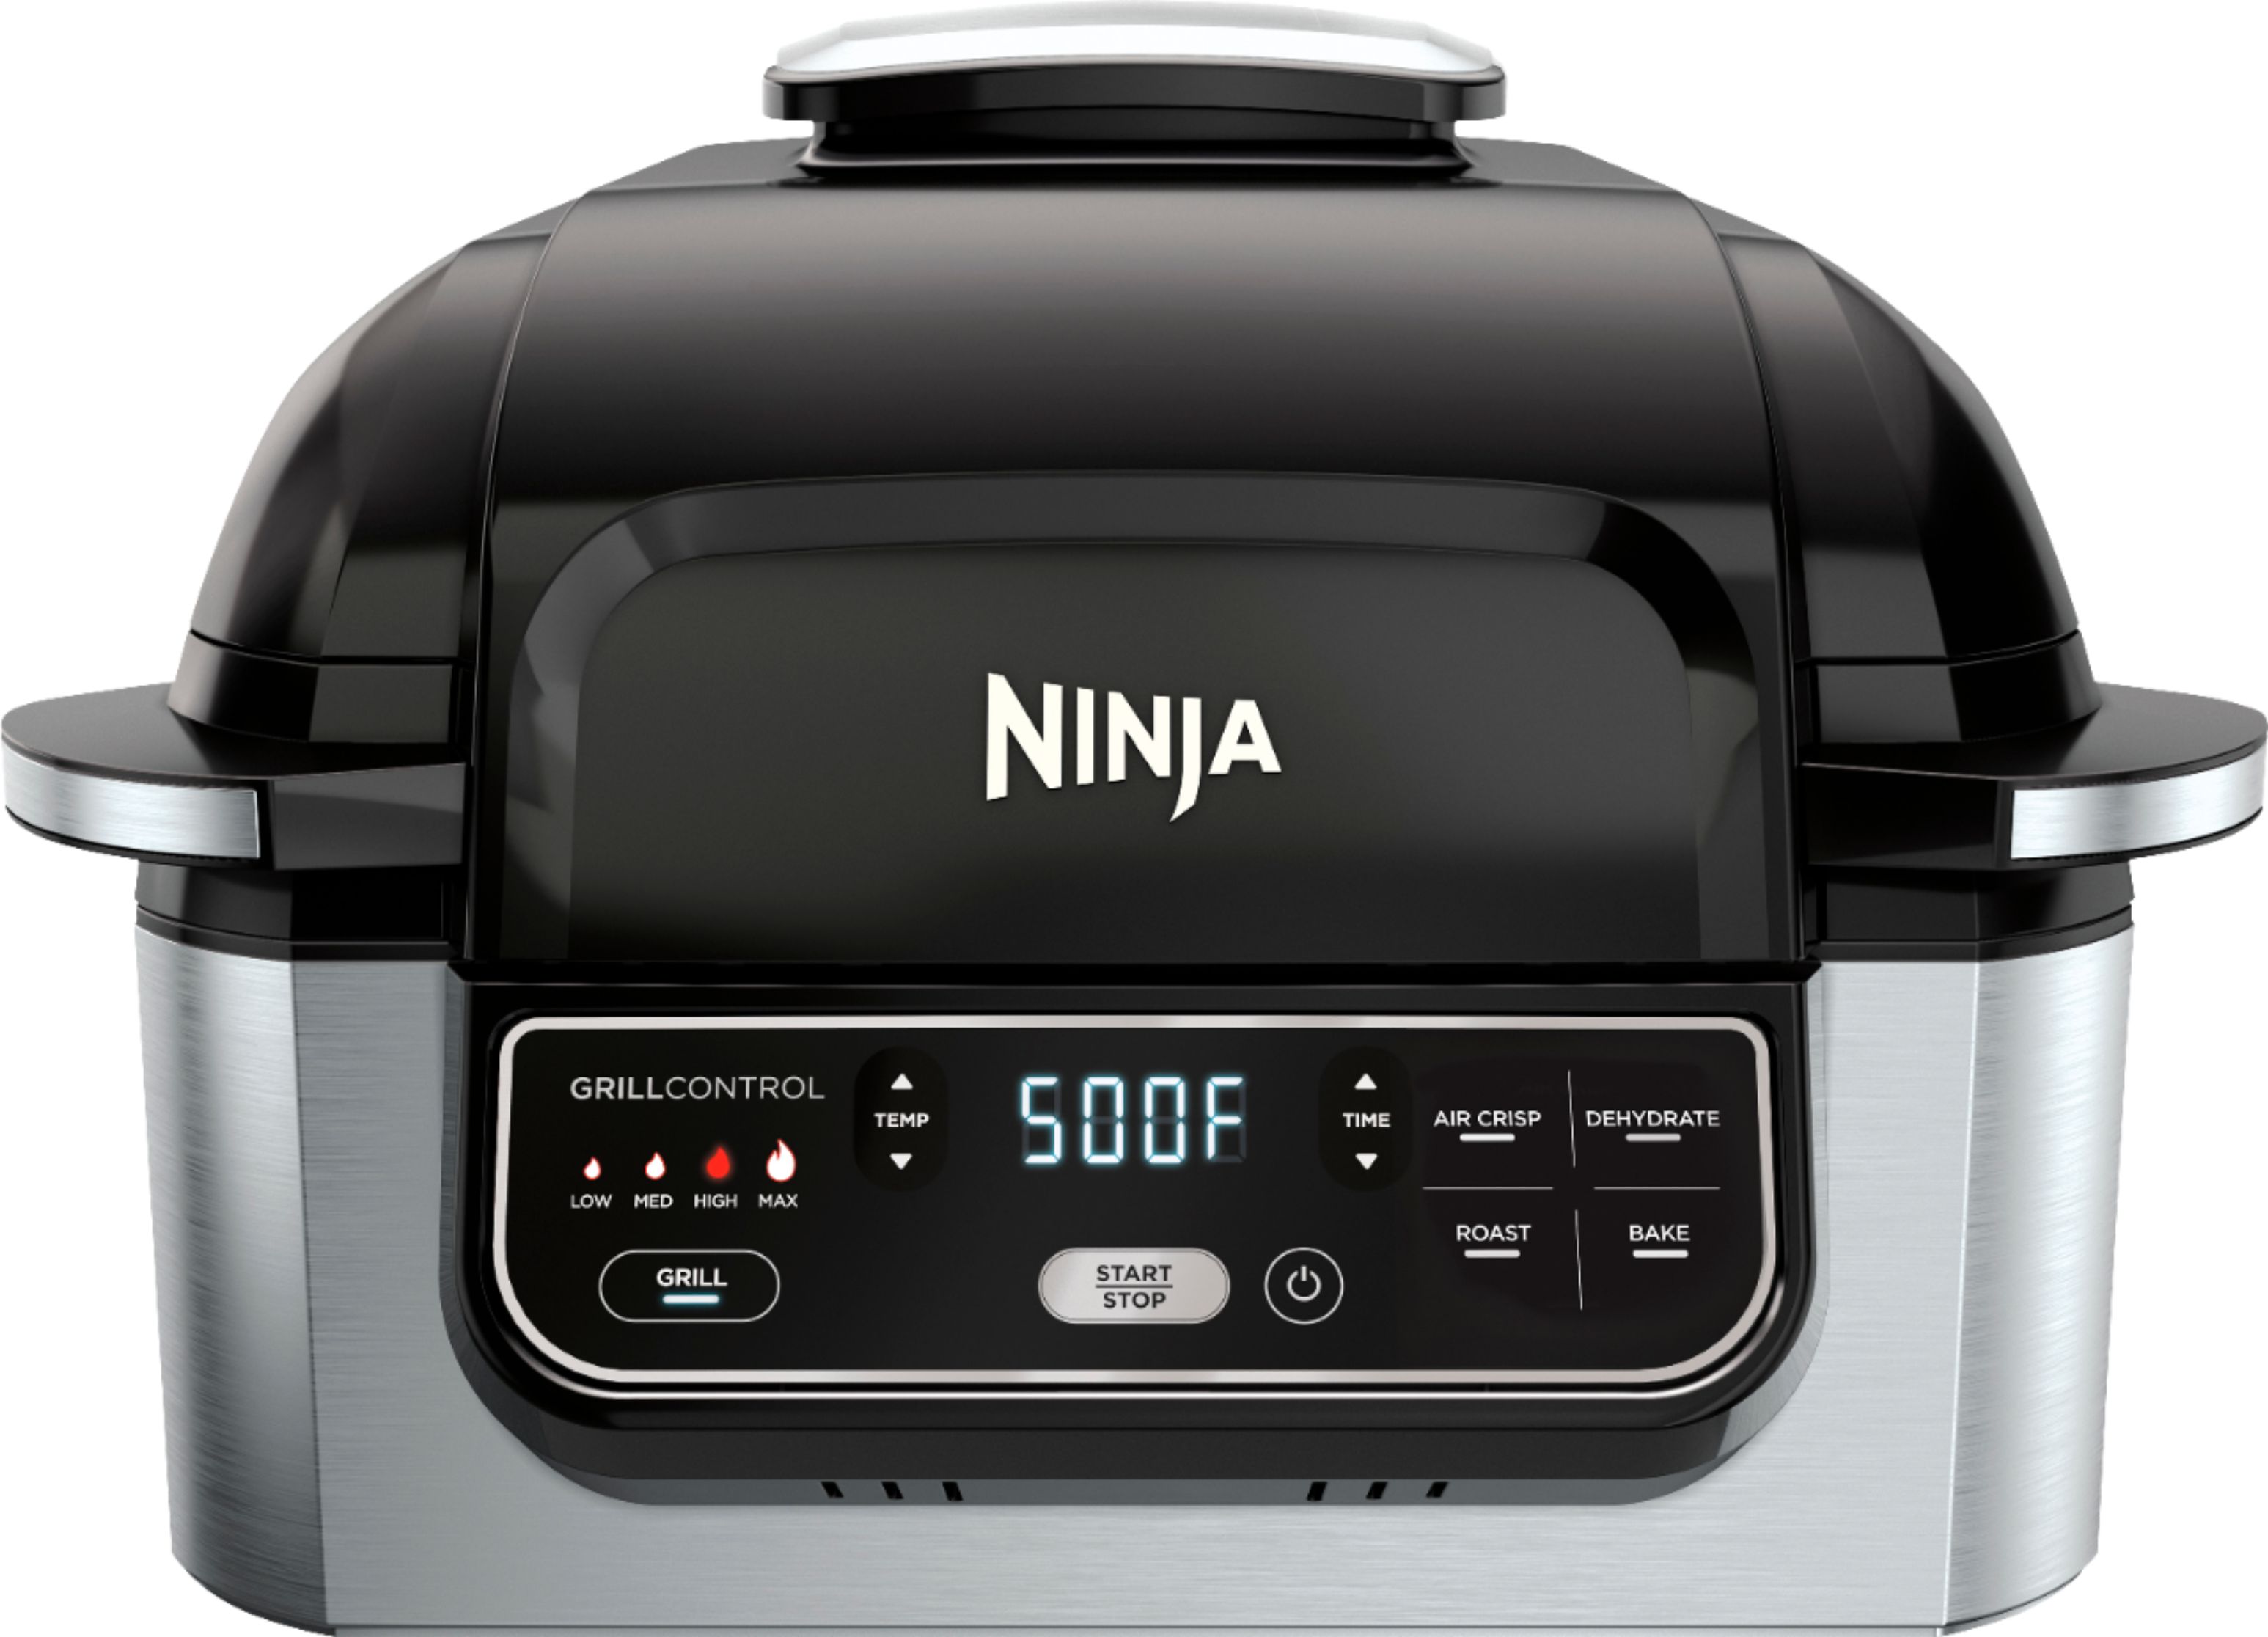 Best air fry oven deal: Save $130 on the Ninja Foodi Dual Heat air fry oven  at Best Buy